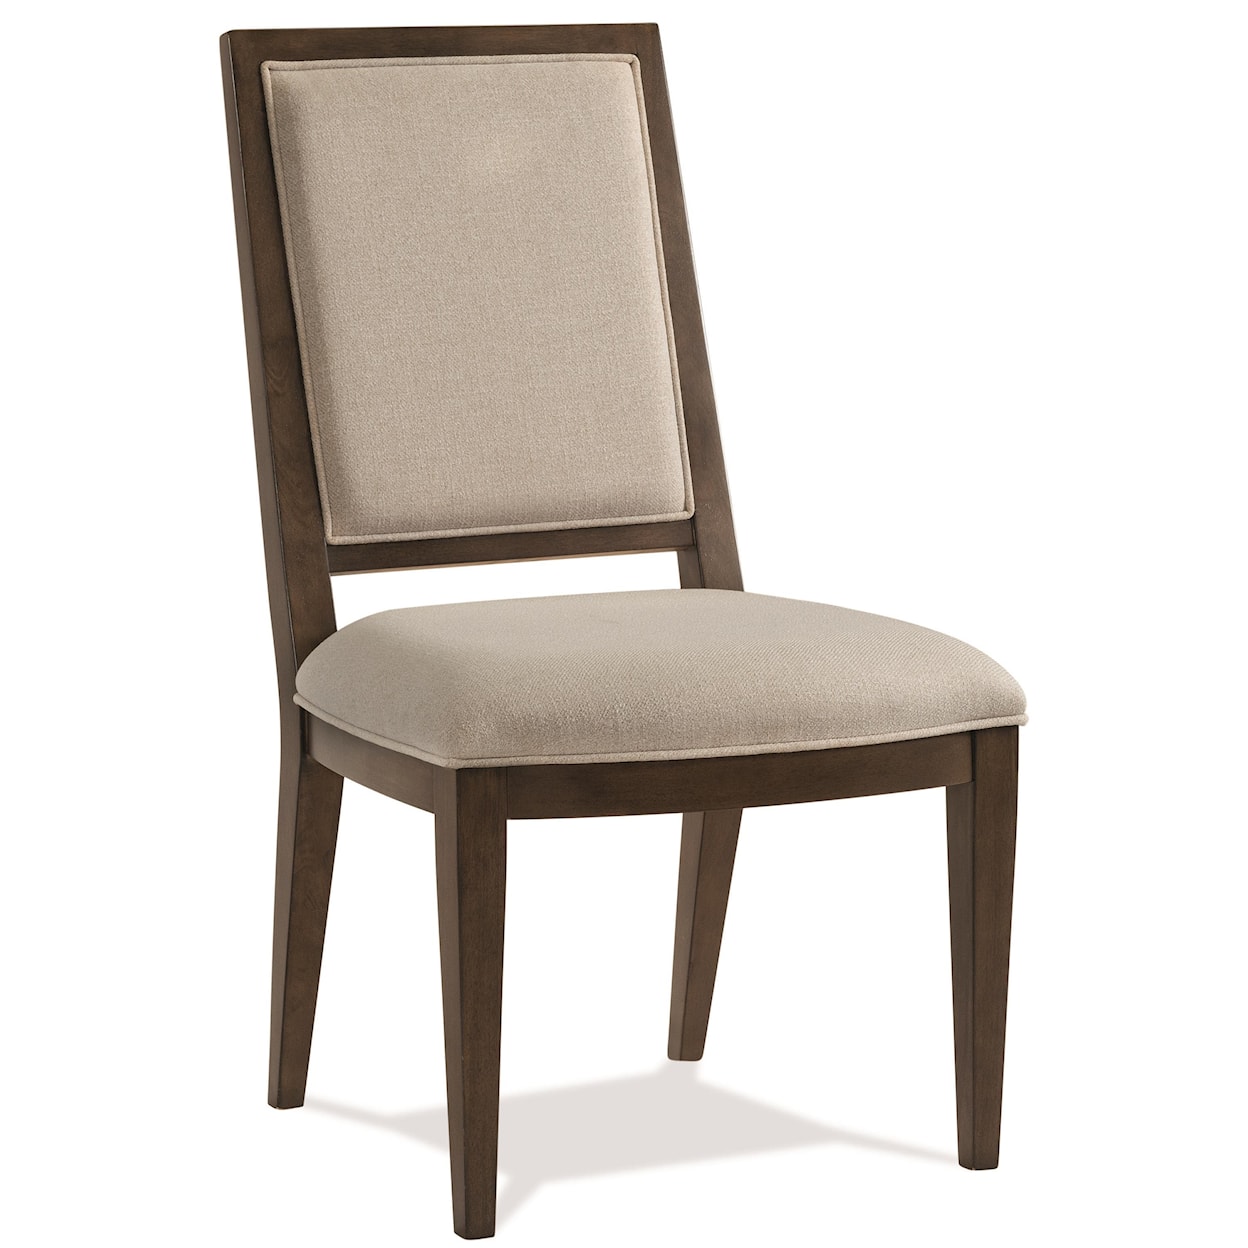 Riverside Furniture Getry Gentry Upholstered Side Chair